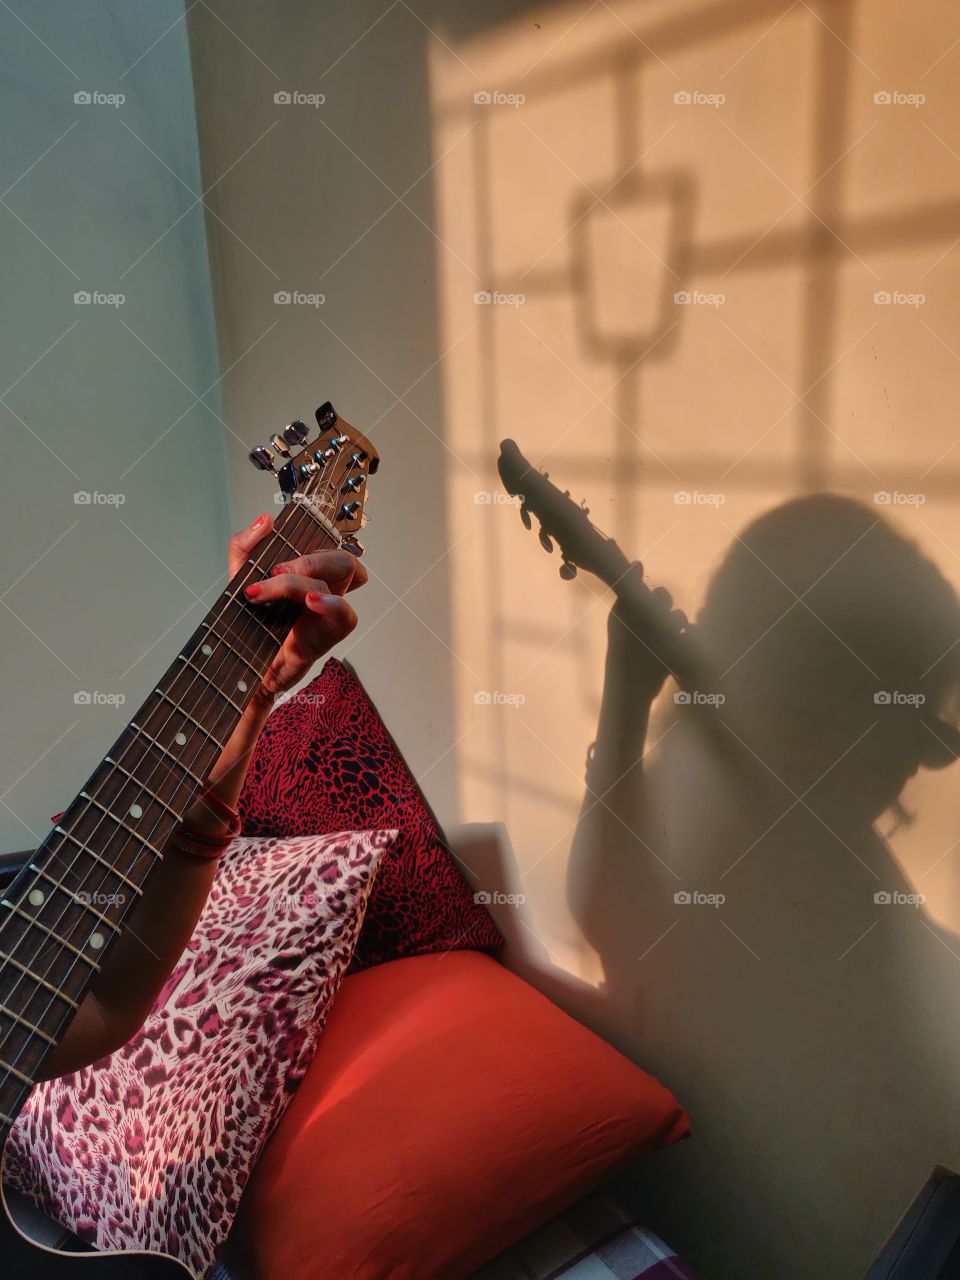 daily habit or routine of practicing guitar in solitude is the best part of the day...🙂